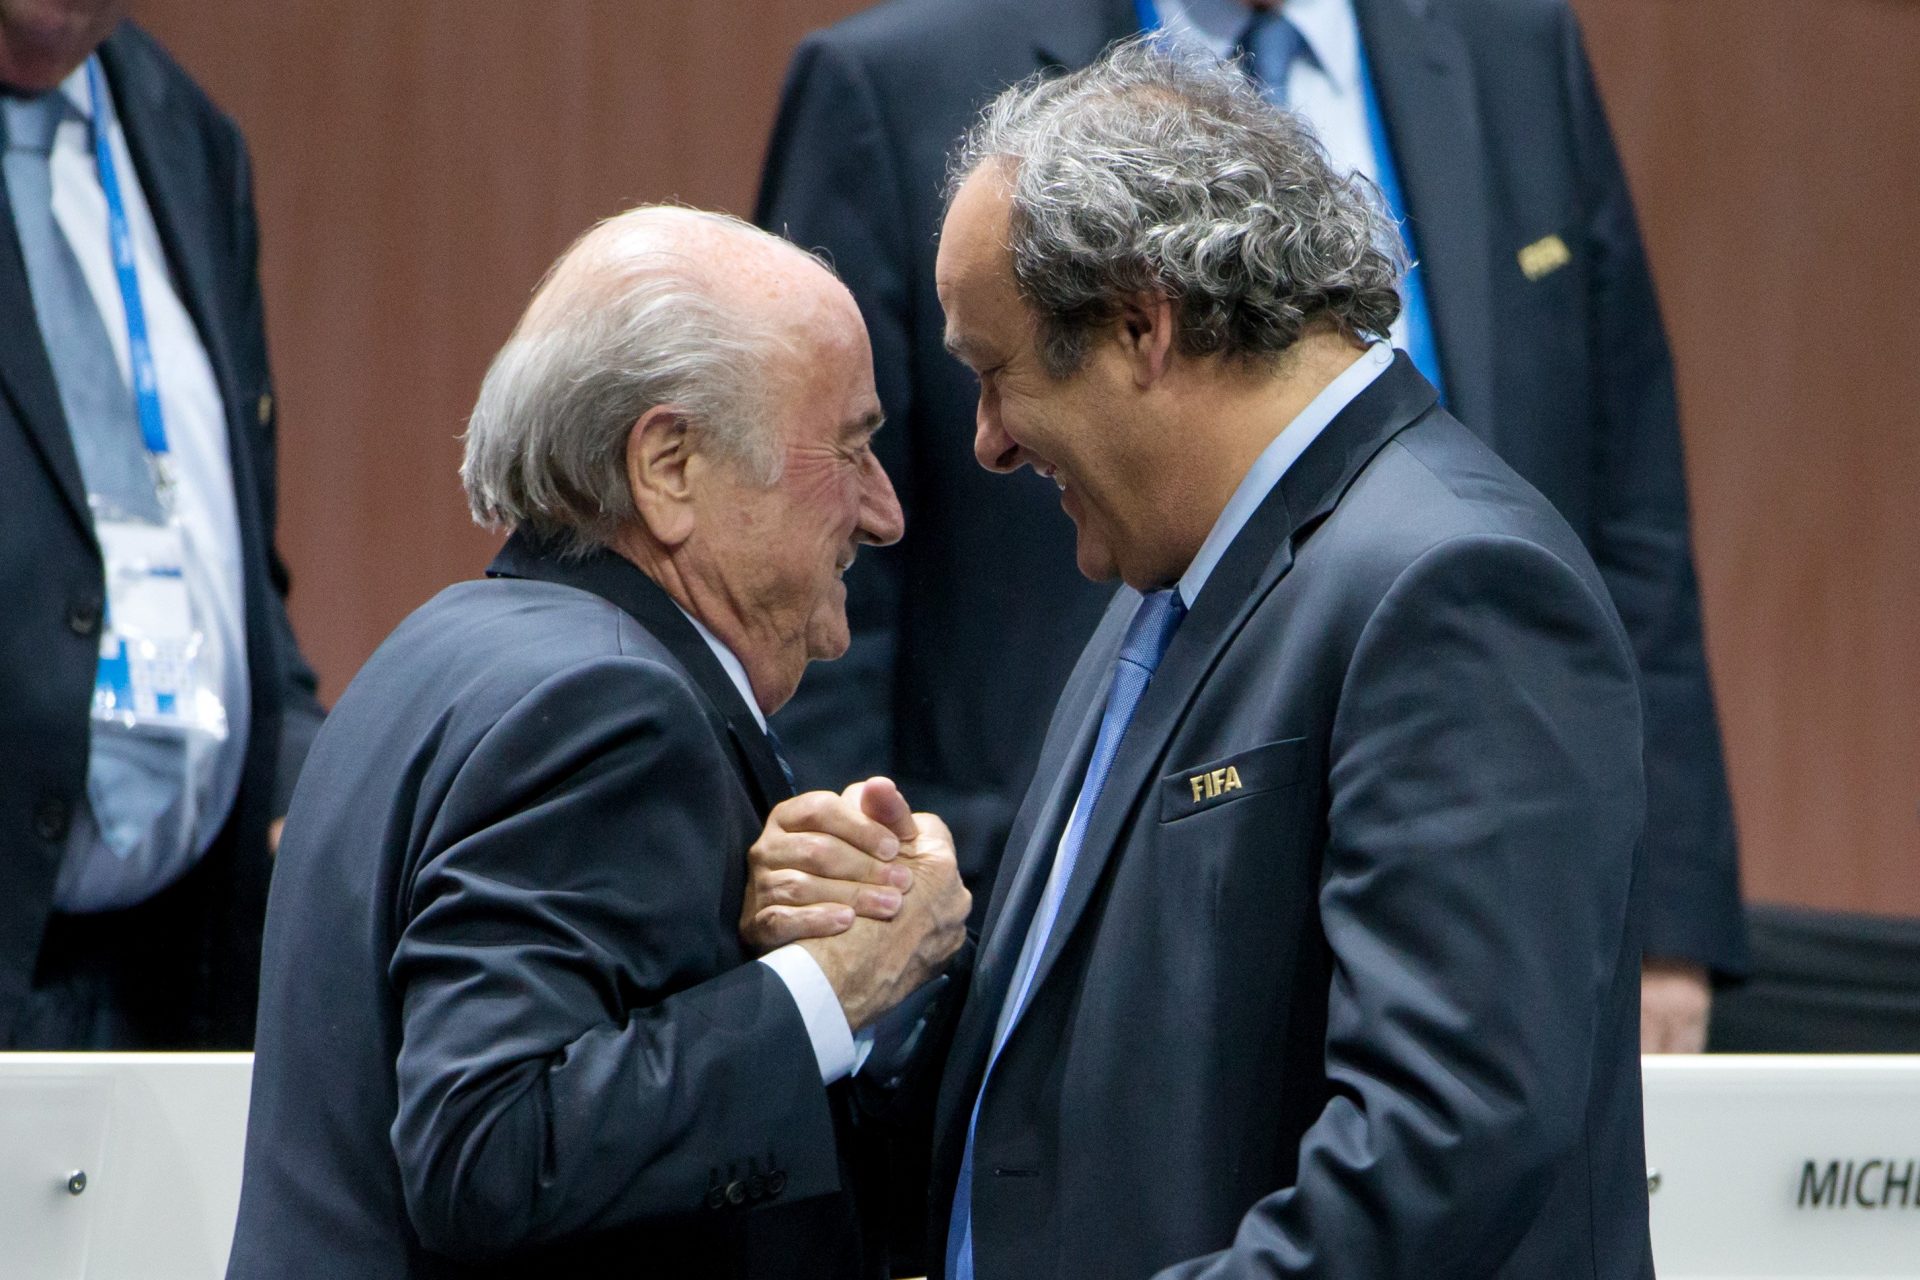 Sepp Blatter, left, and Michel Platini in 2015. Both are now football outcasts facing corruption charges. Photo: Philipp Schmidli/
Getty Images.